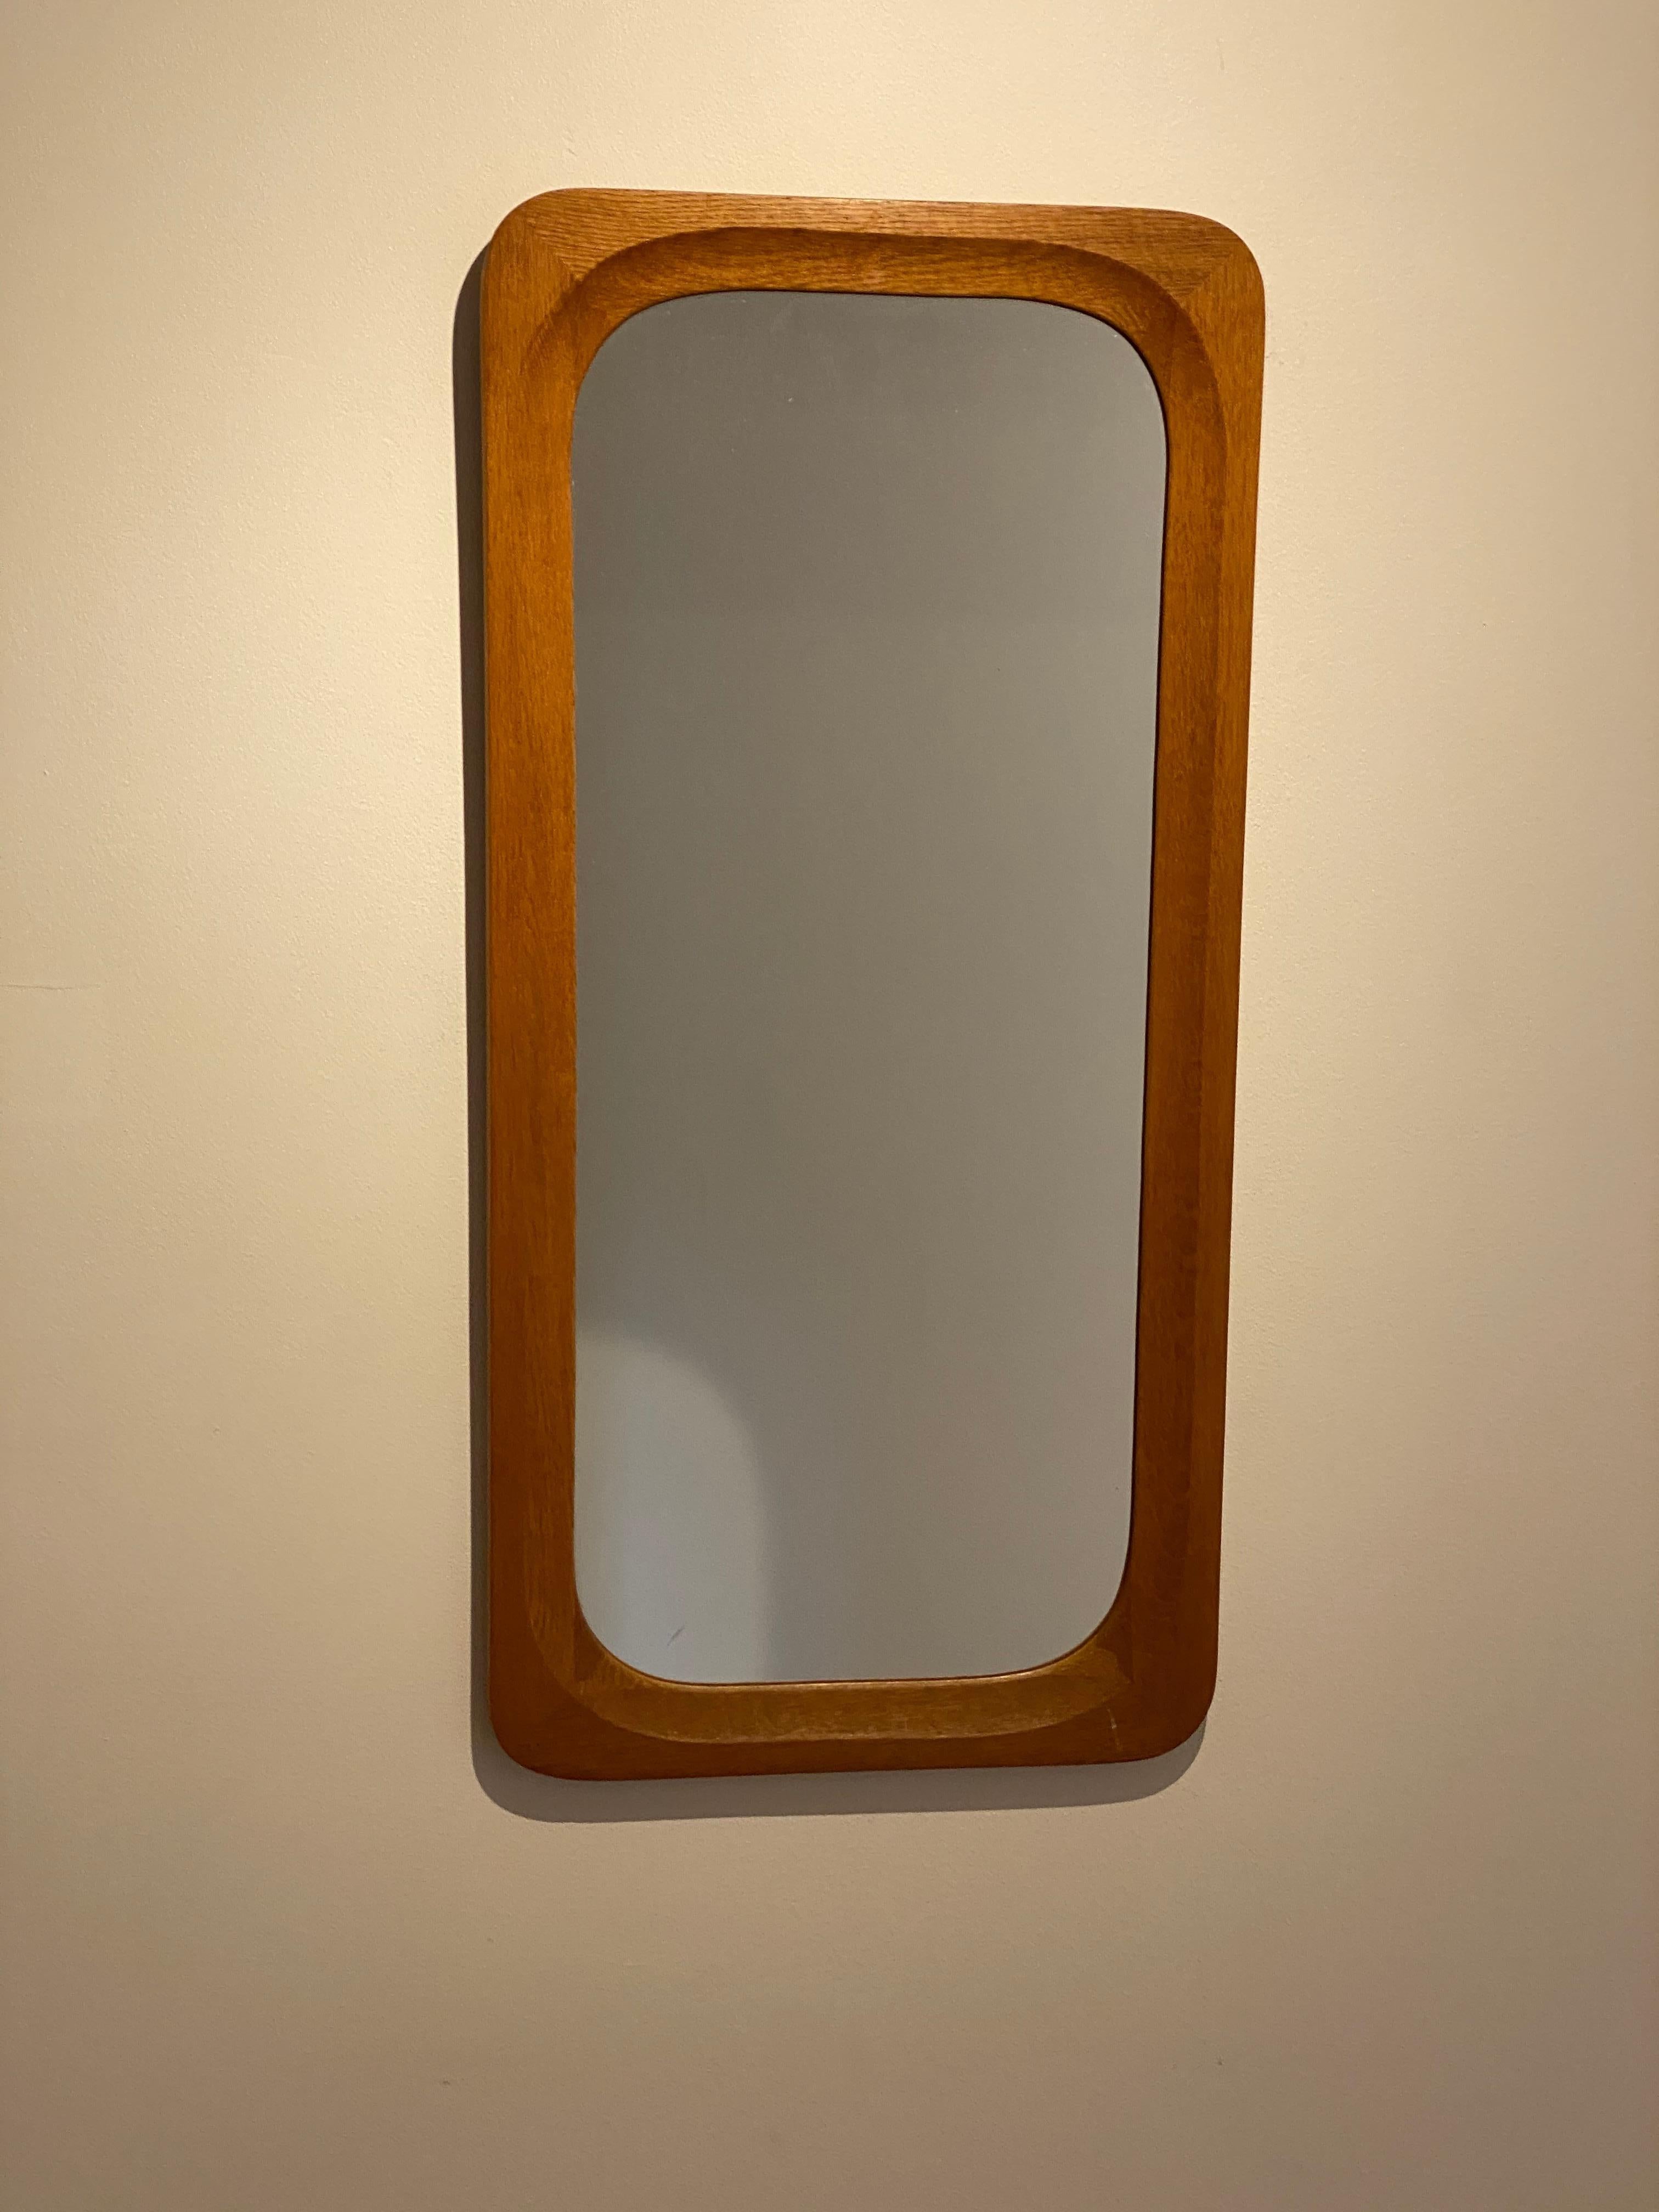 A stained oak mirror, glass with a finely sculpted teak frame wrapping the glass in a rounded form.

Other designers of the period include Hans Wegner, Josef Frank, Finn Juhl, George Nakashima and Arne Jacobsen.